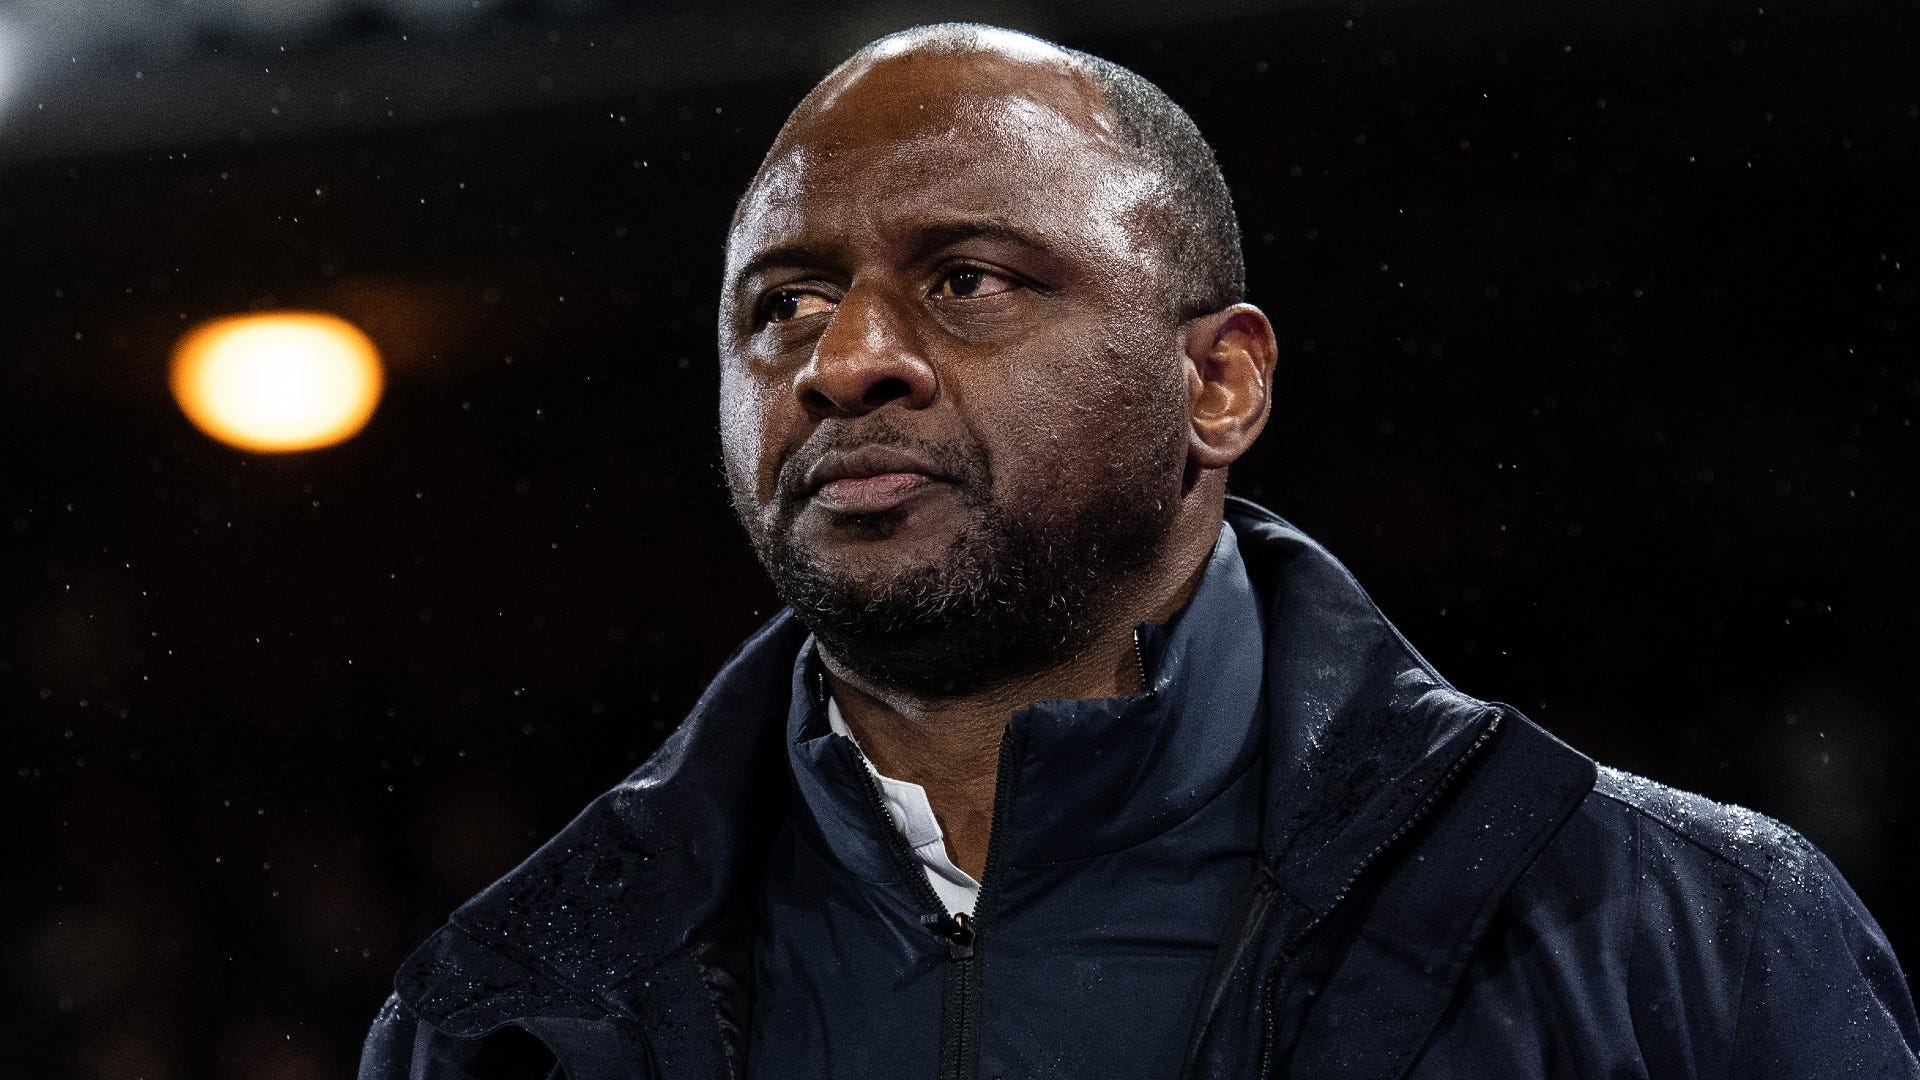 Patrick Vieira thinks of the US: Will he be the next manager?